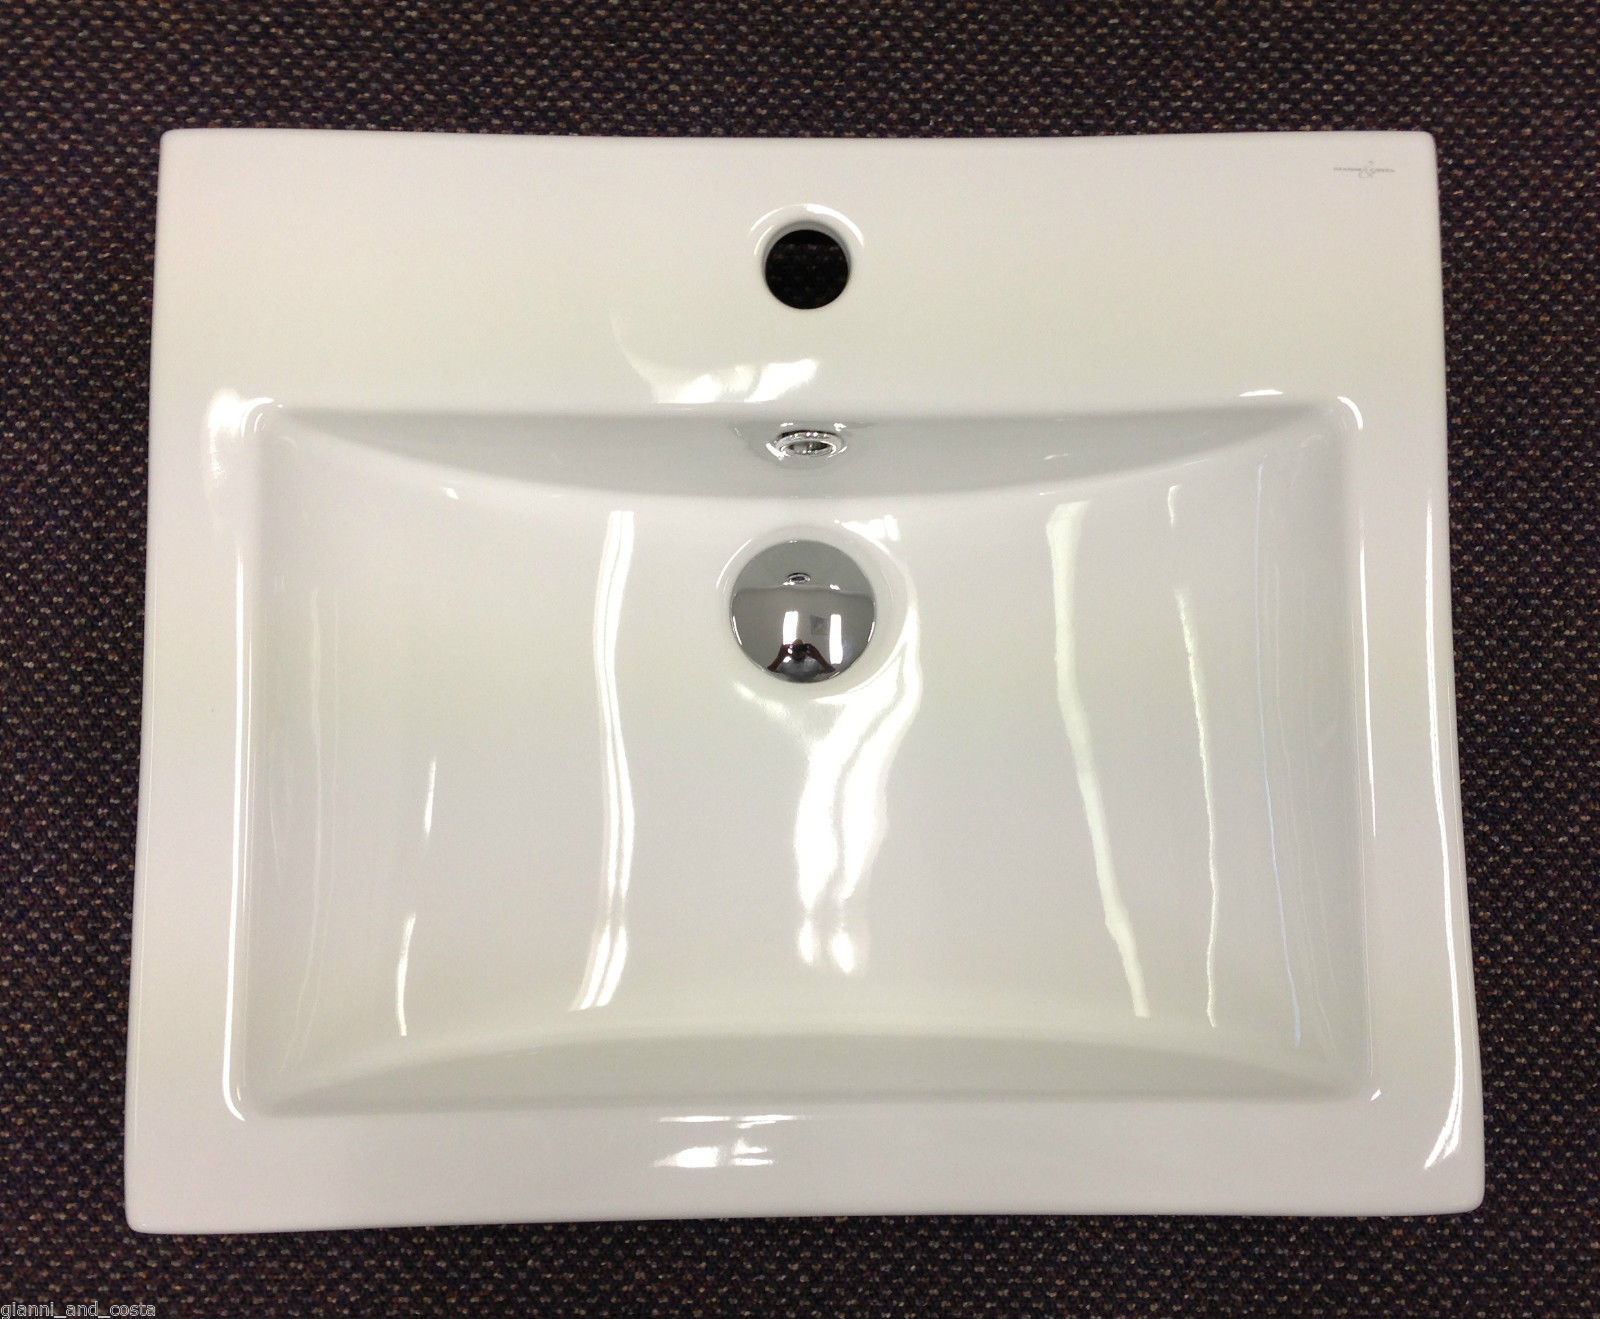 CERAMIC RECTANGULAR ABOVE COUNTER TOP BASIN INCLUDES POP-UP WASTE